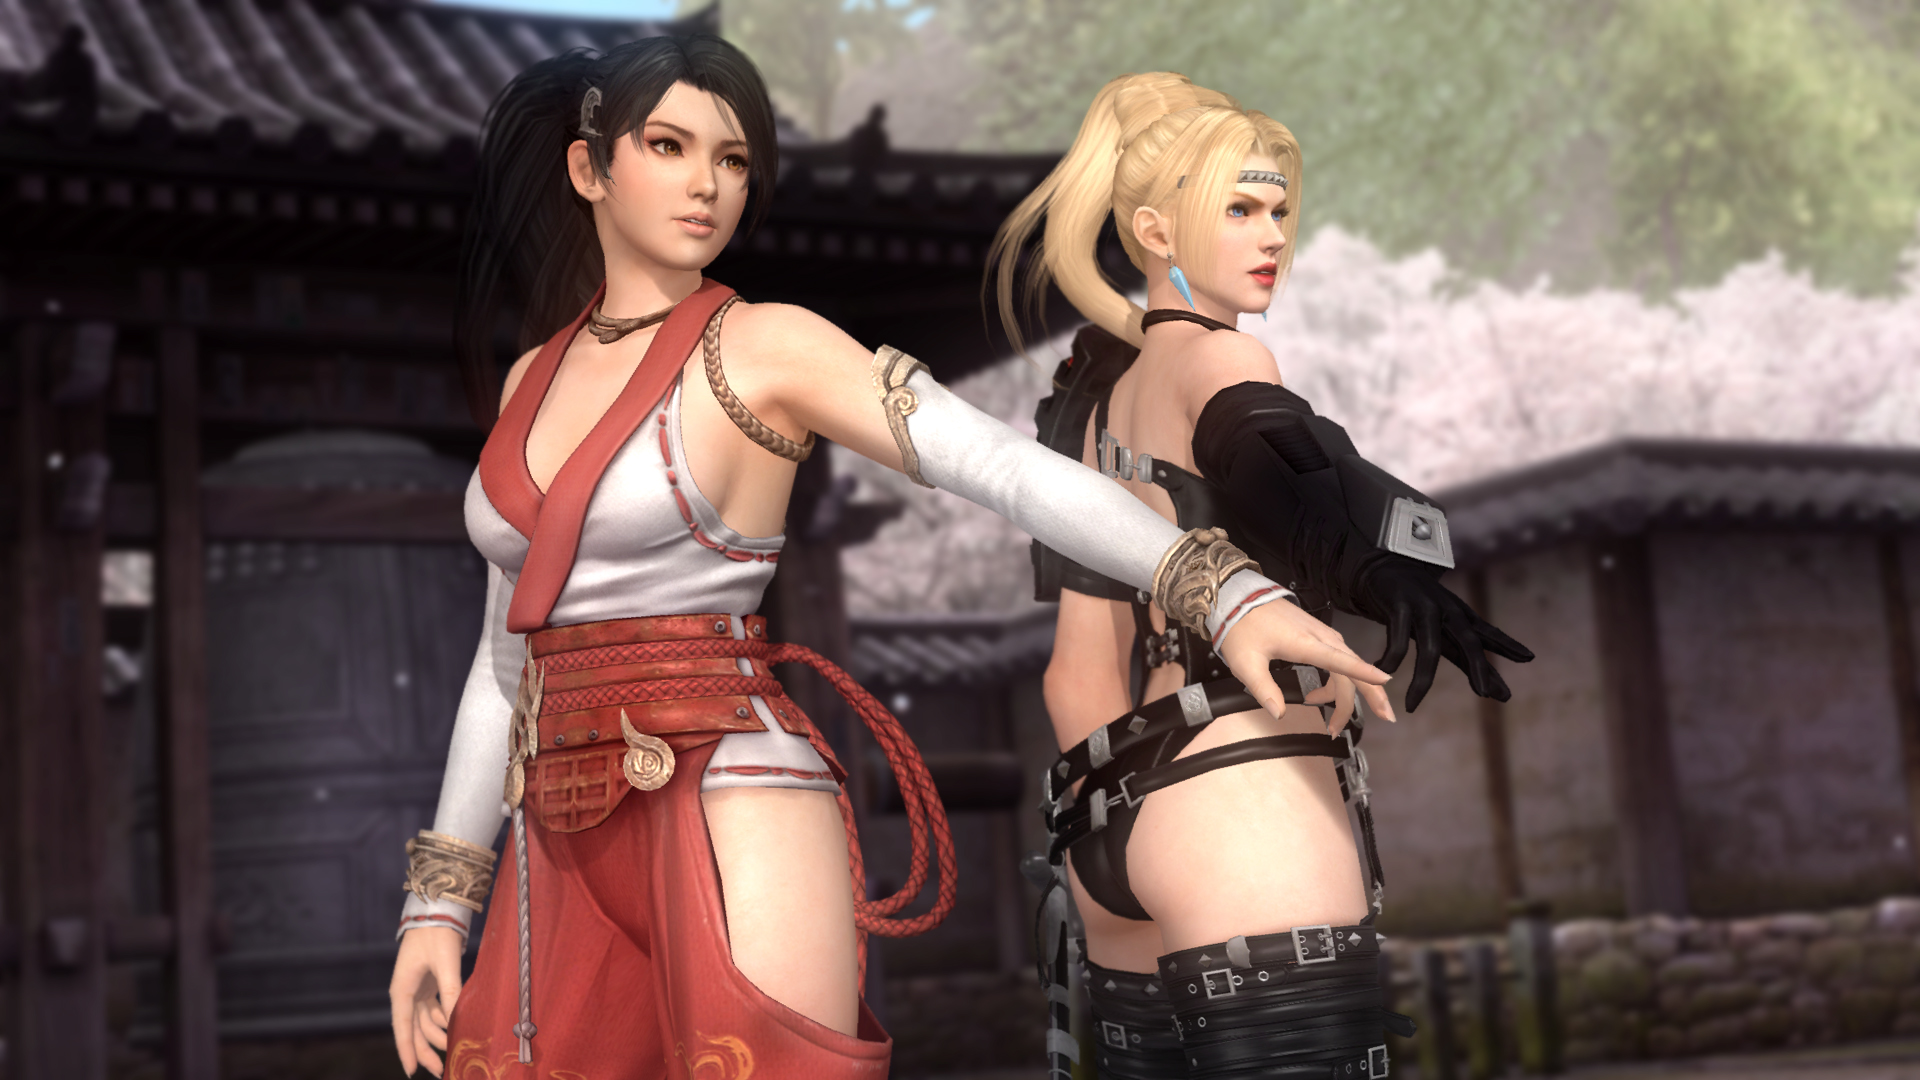 Dead Or Alive 5 Last Round Core Fighters On Steam